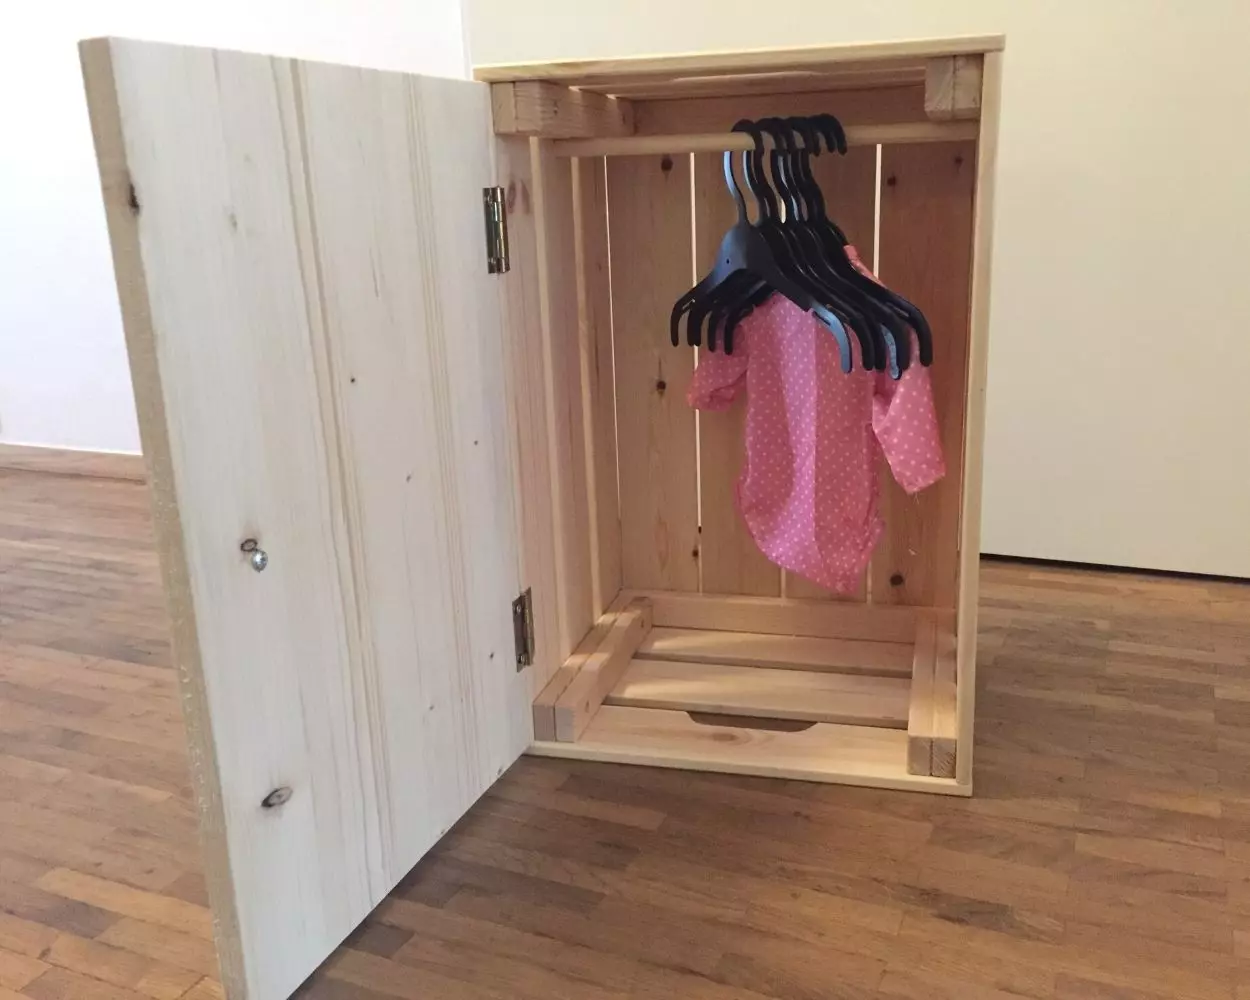 Build your own doll's wardrobe from an IKEA box